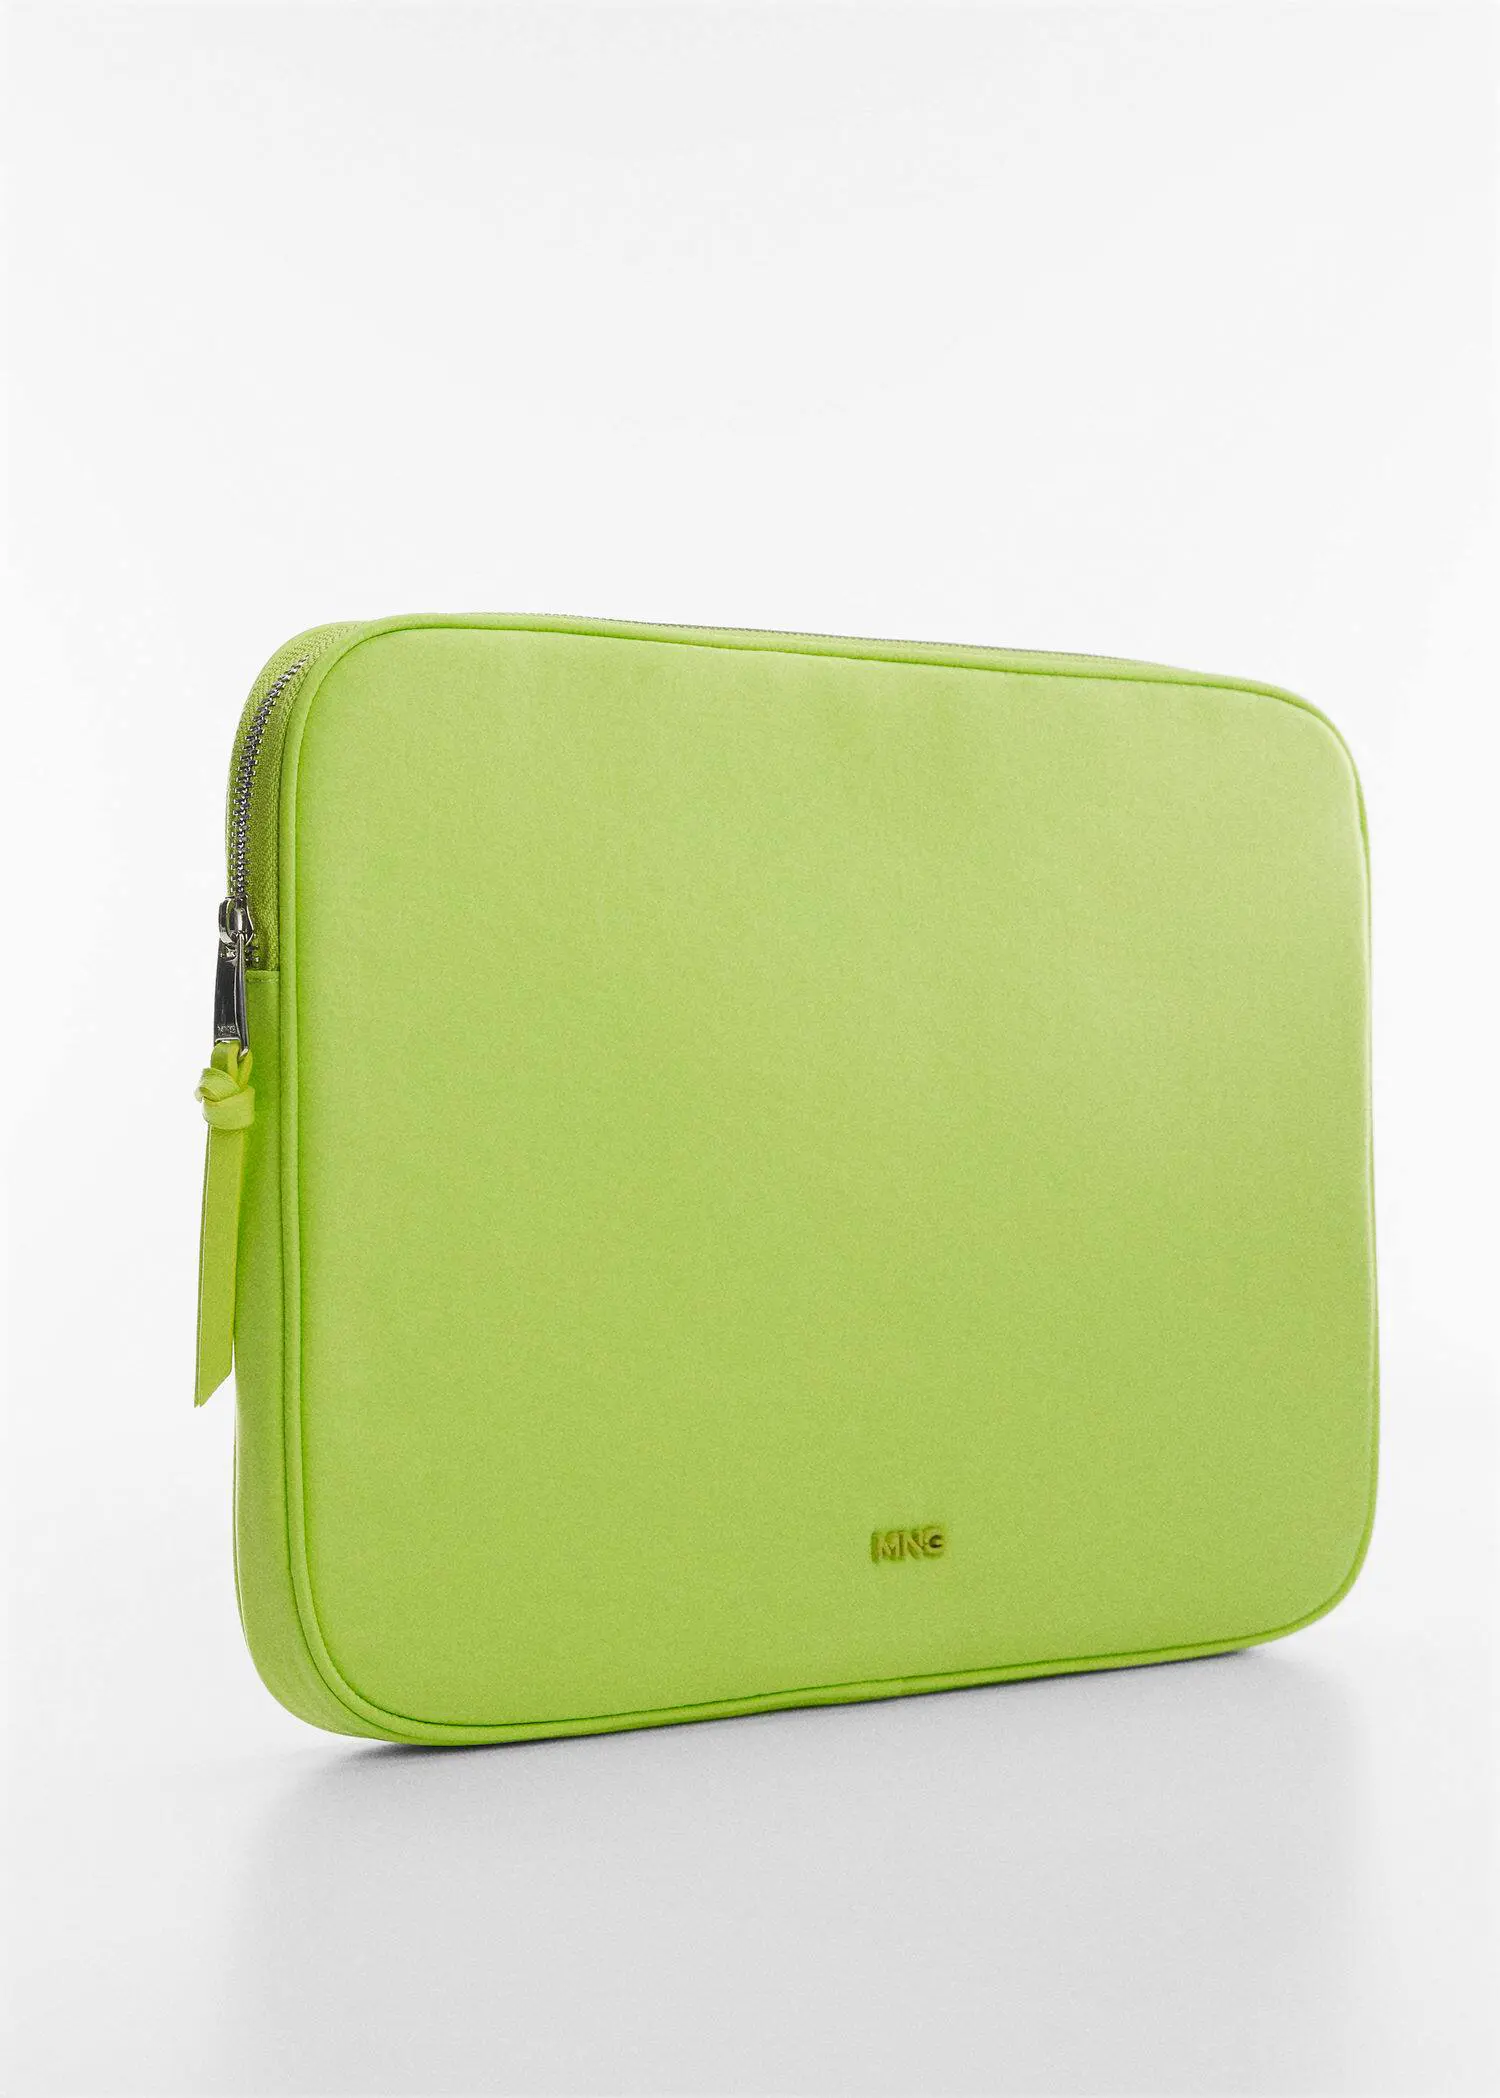 Mango Double-compartment laptop case. a lime green laptop case sitting on top of a white table. 